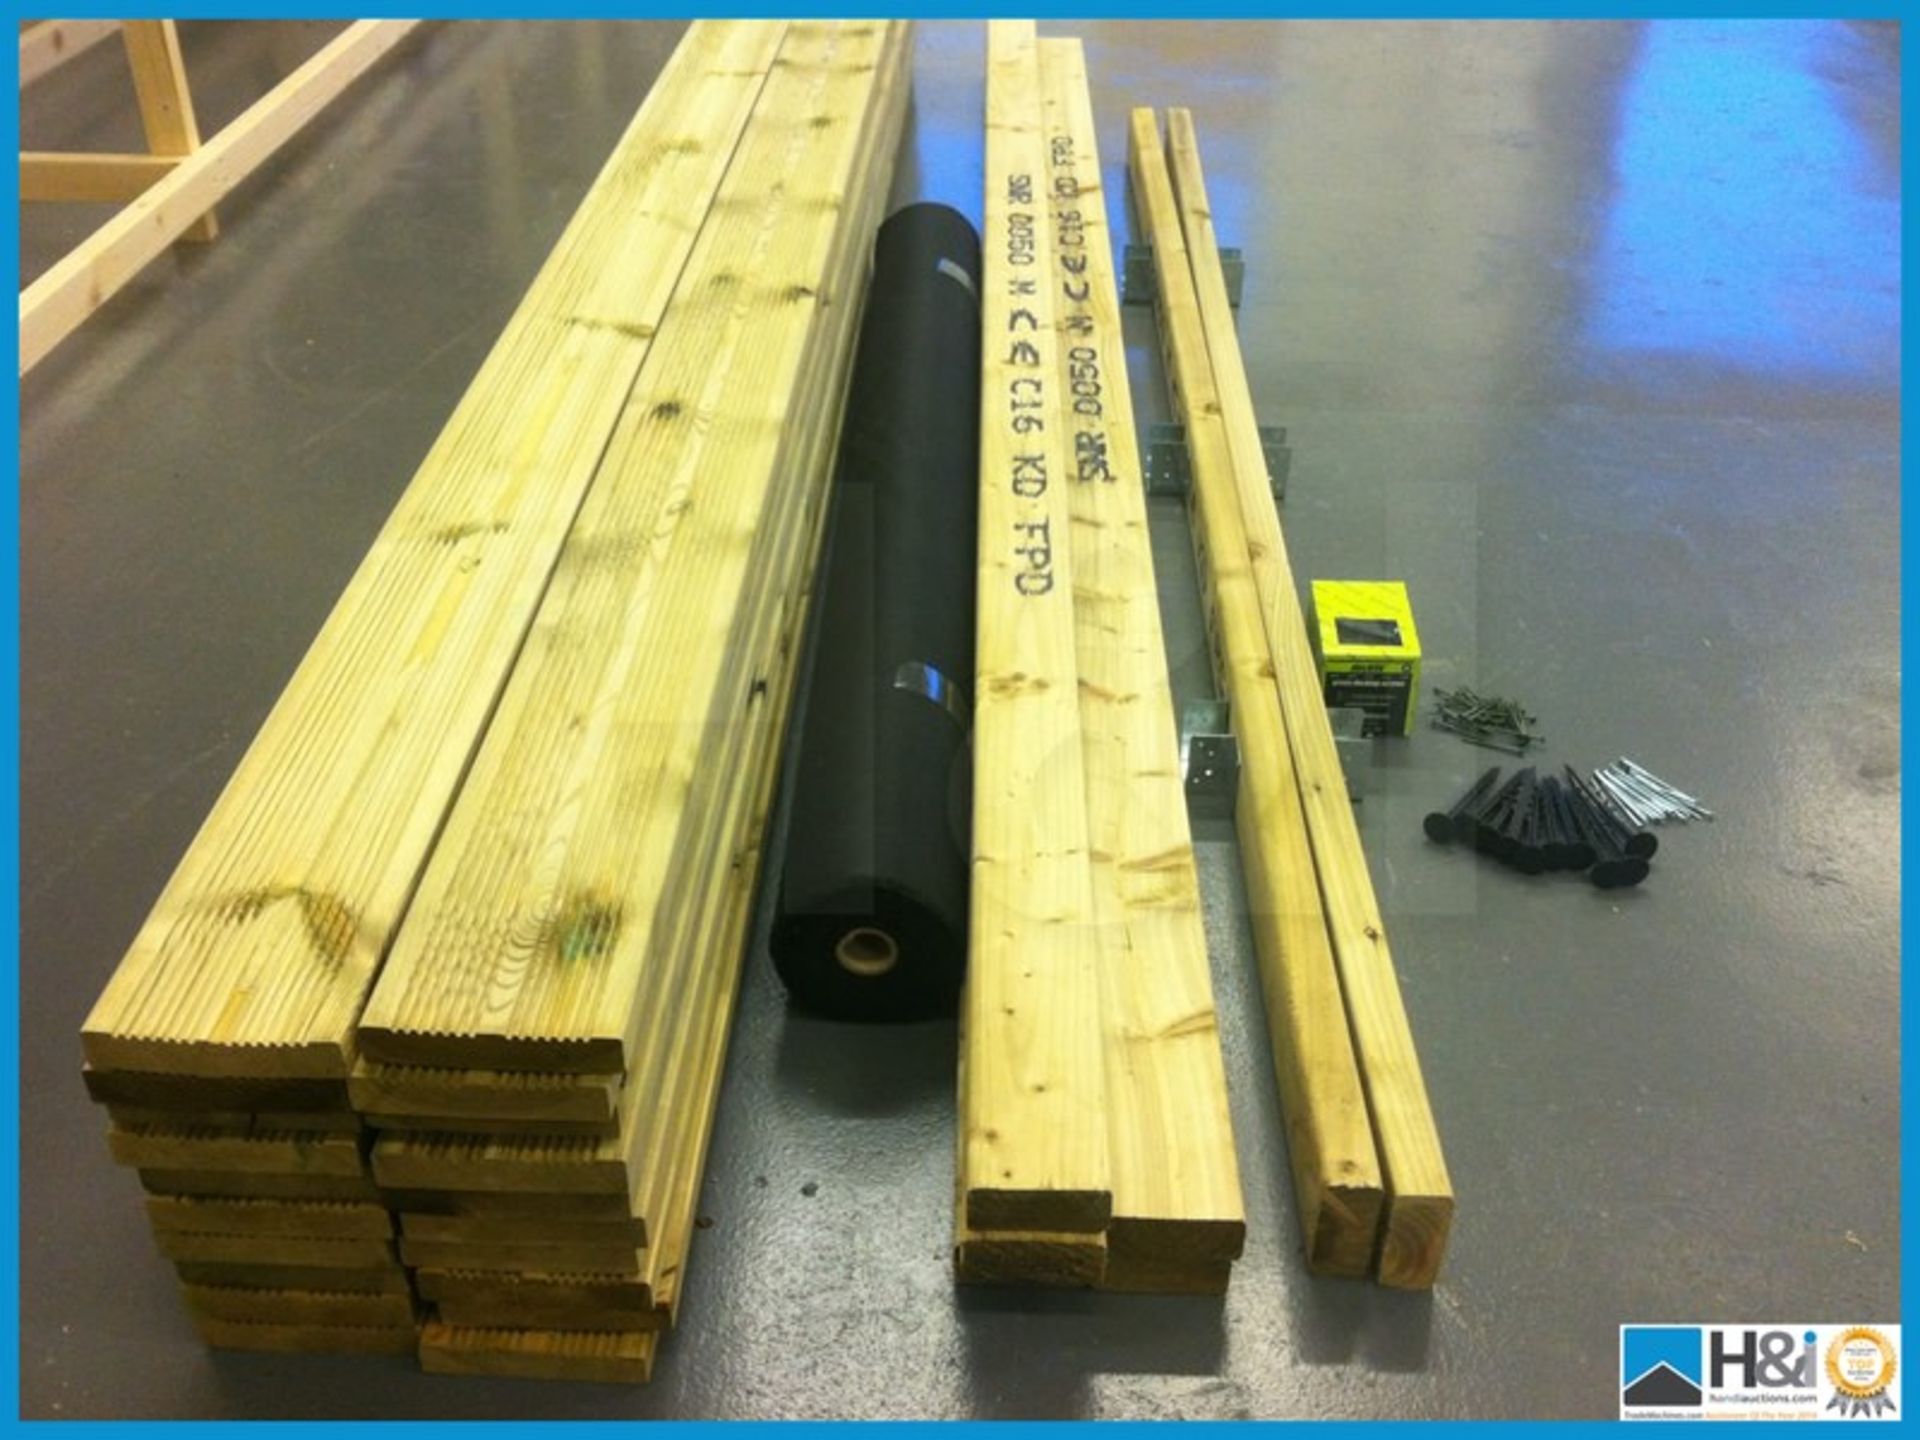 Tanalised 2.4 x 3.0 Heavy Duty Decking Kit. All 32x125 decking cut to length with side fascia's